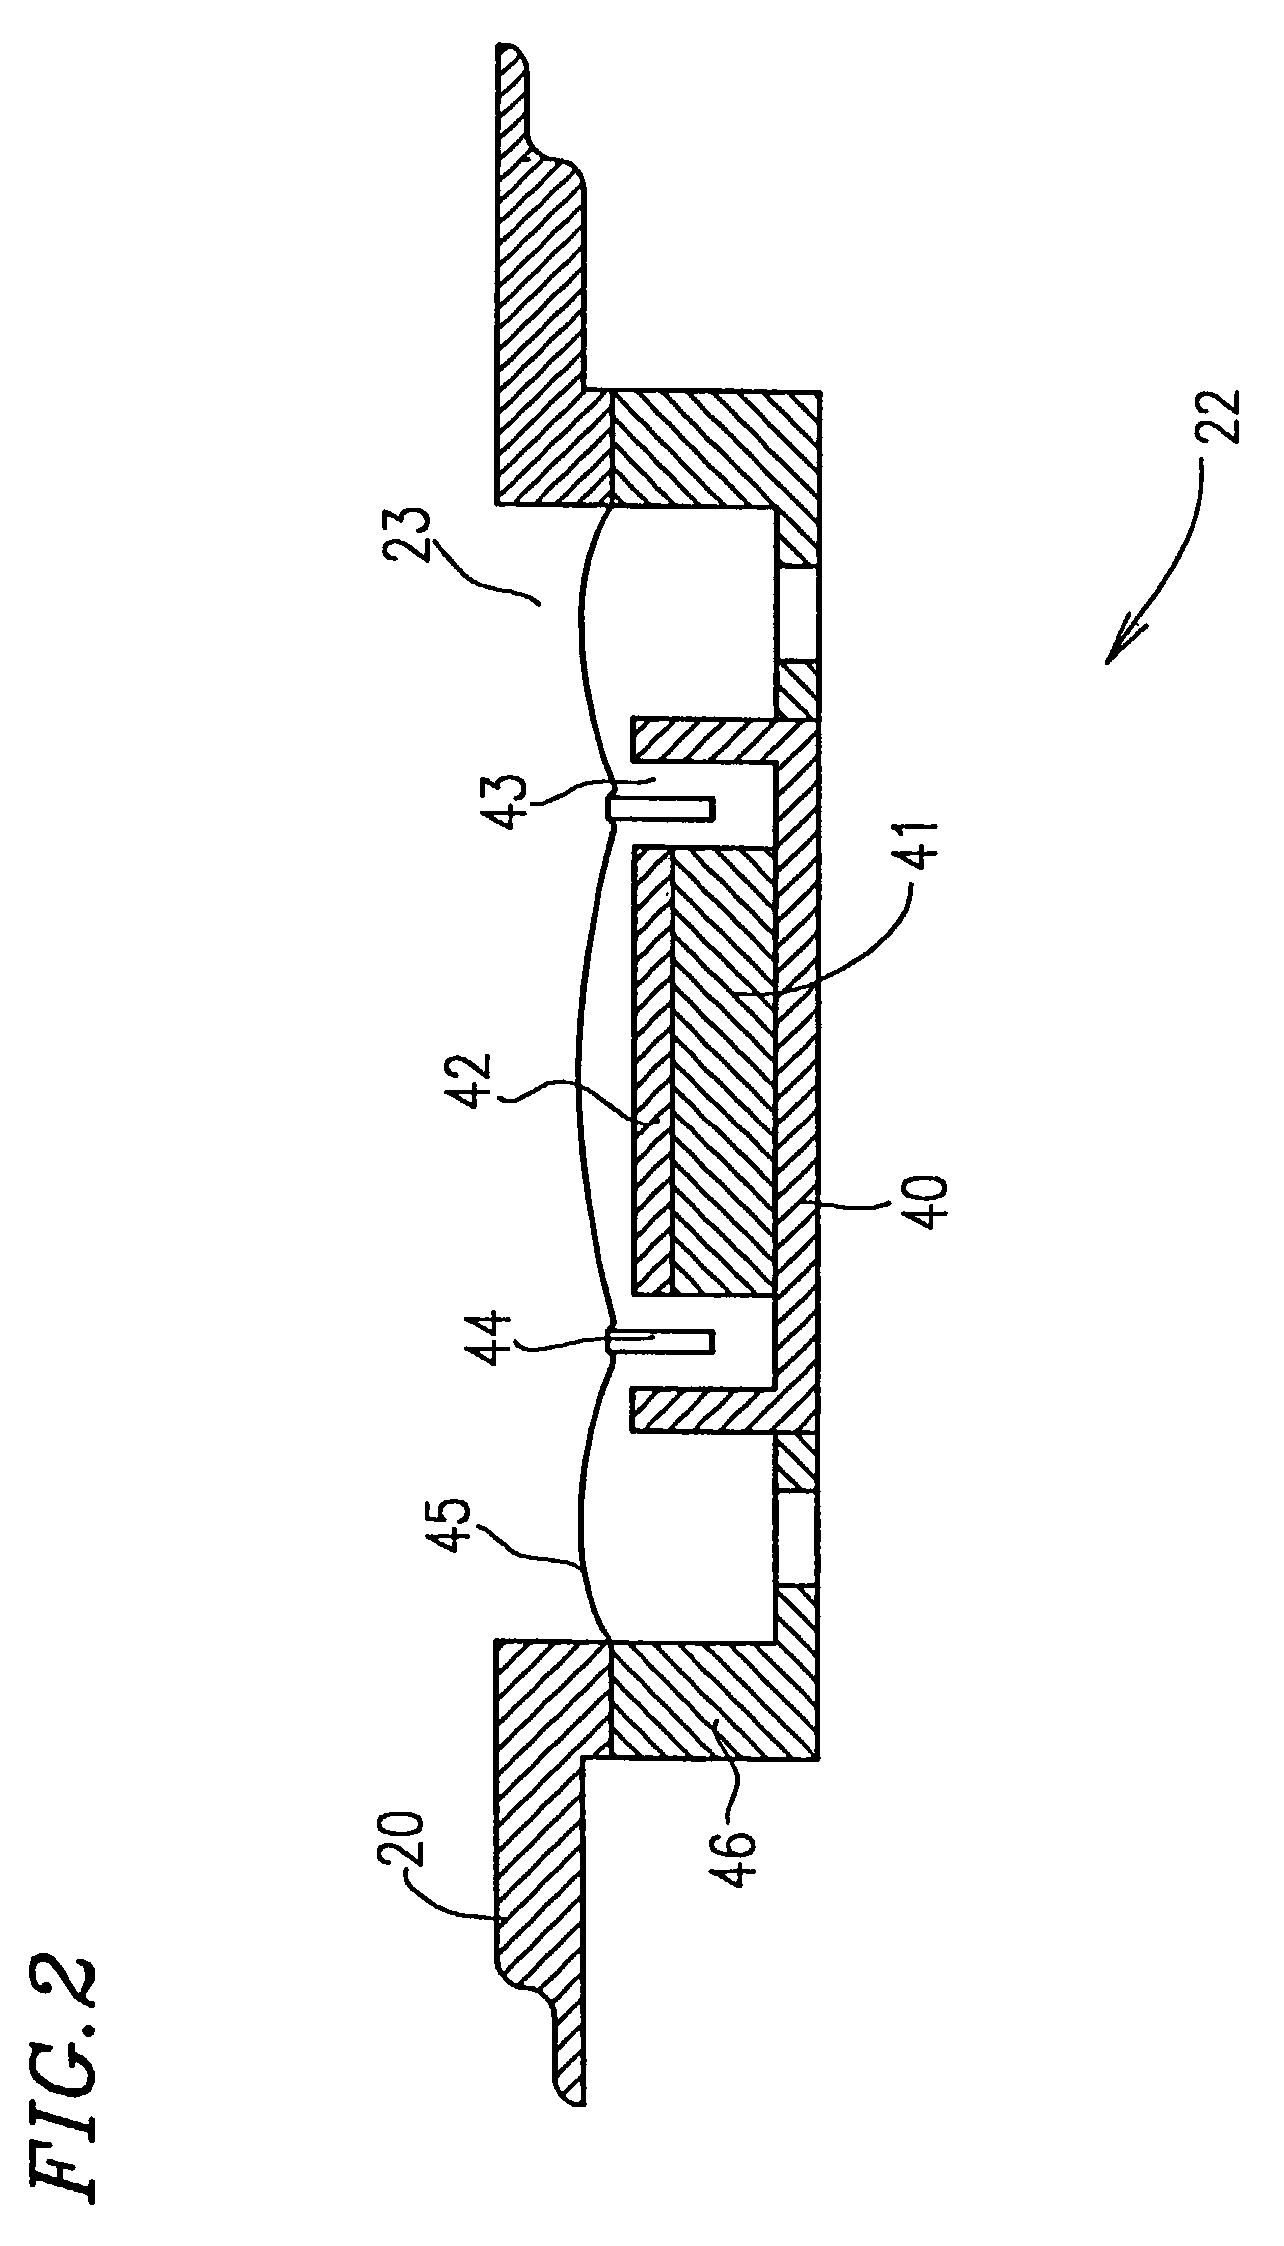 Speaker system, mobile terminal device, and electronic device